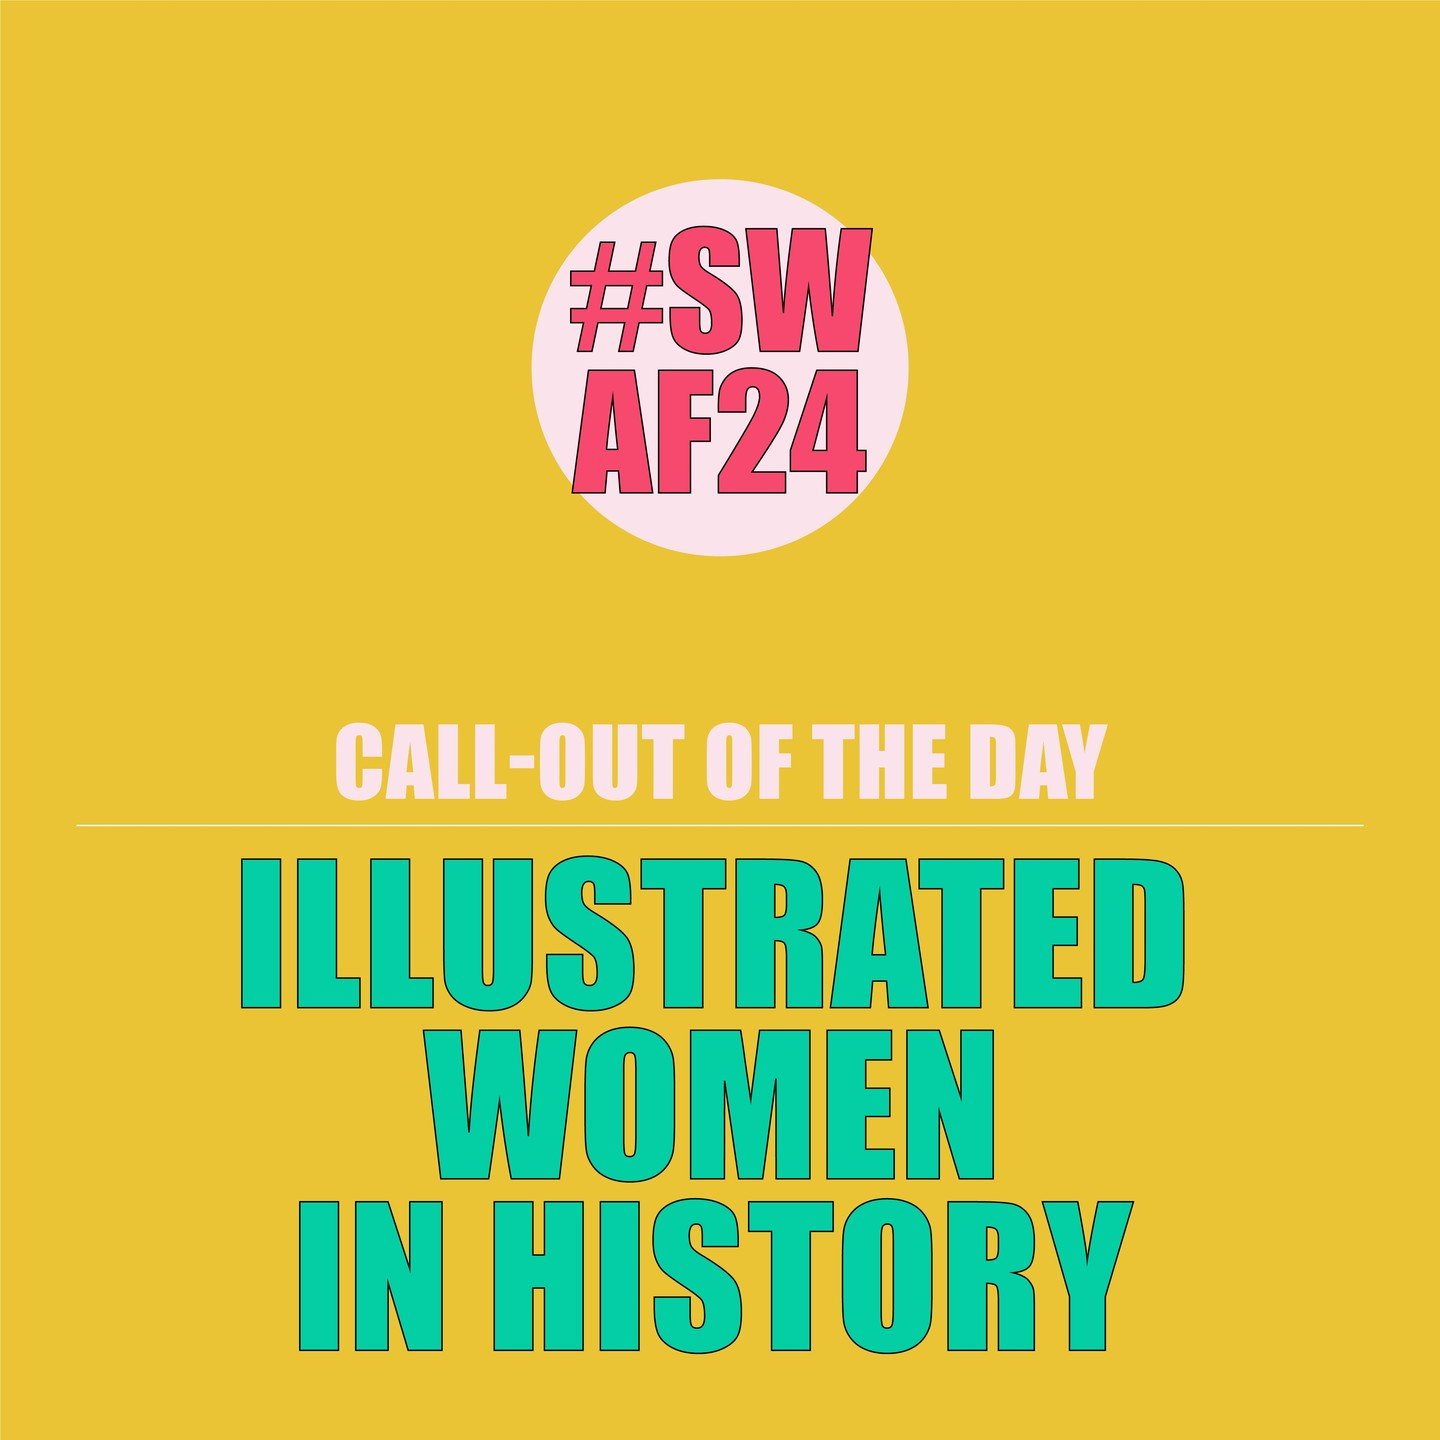 Exhibition: Illustrated Women in History
Curated by:Julie Gough
Instagram: @illustratedwih @swinzinefest
website: www.illustratedwomeninhistory.com &amp; www.apalelanscape.co.uk

The Illustrated Women in History project is a way of fighting against t